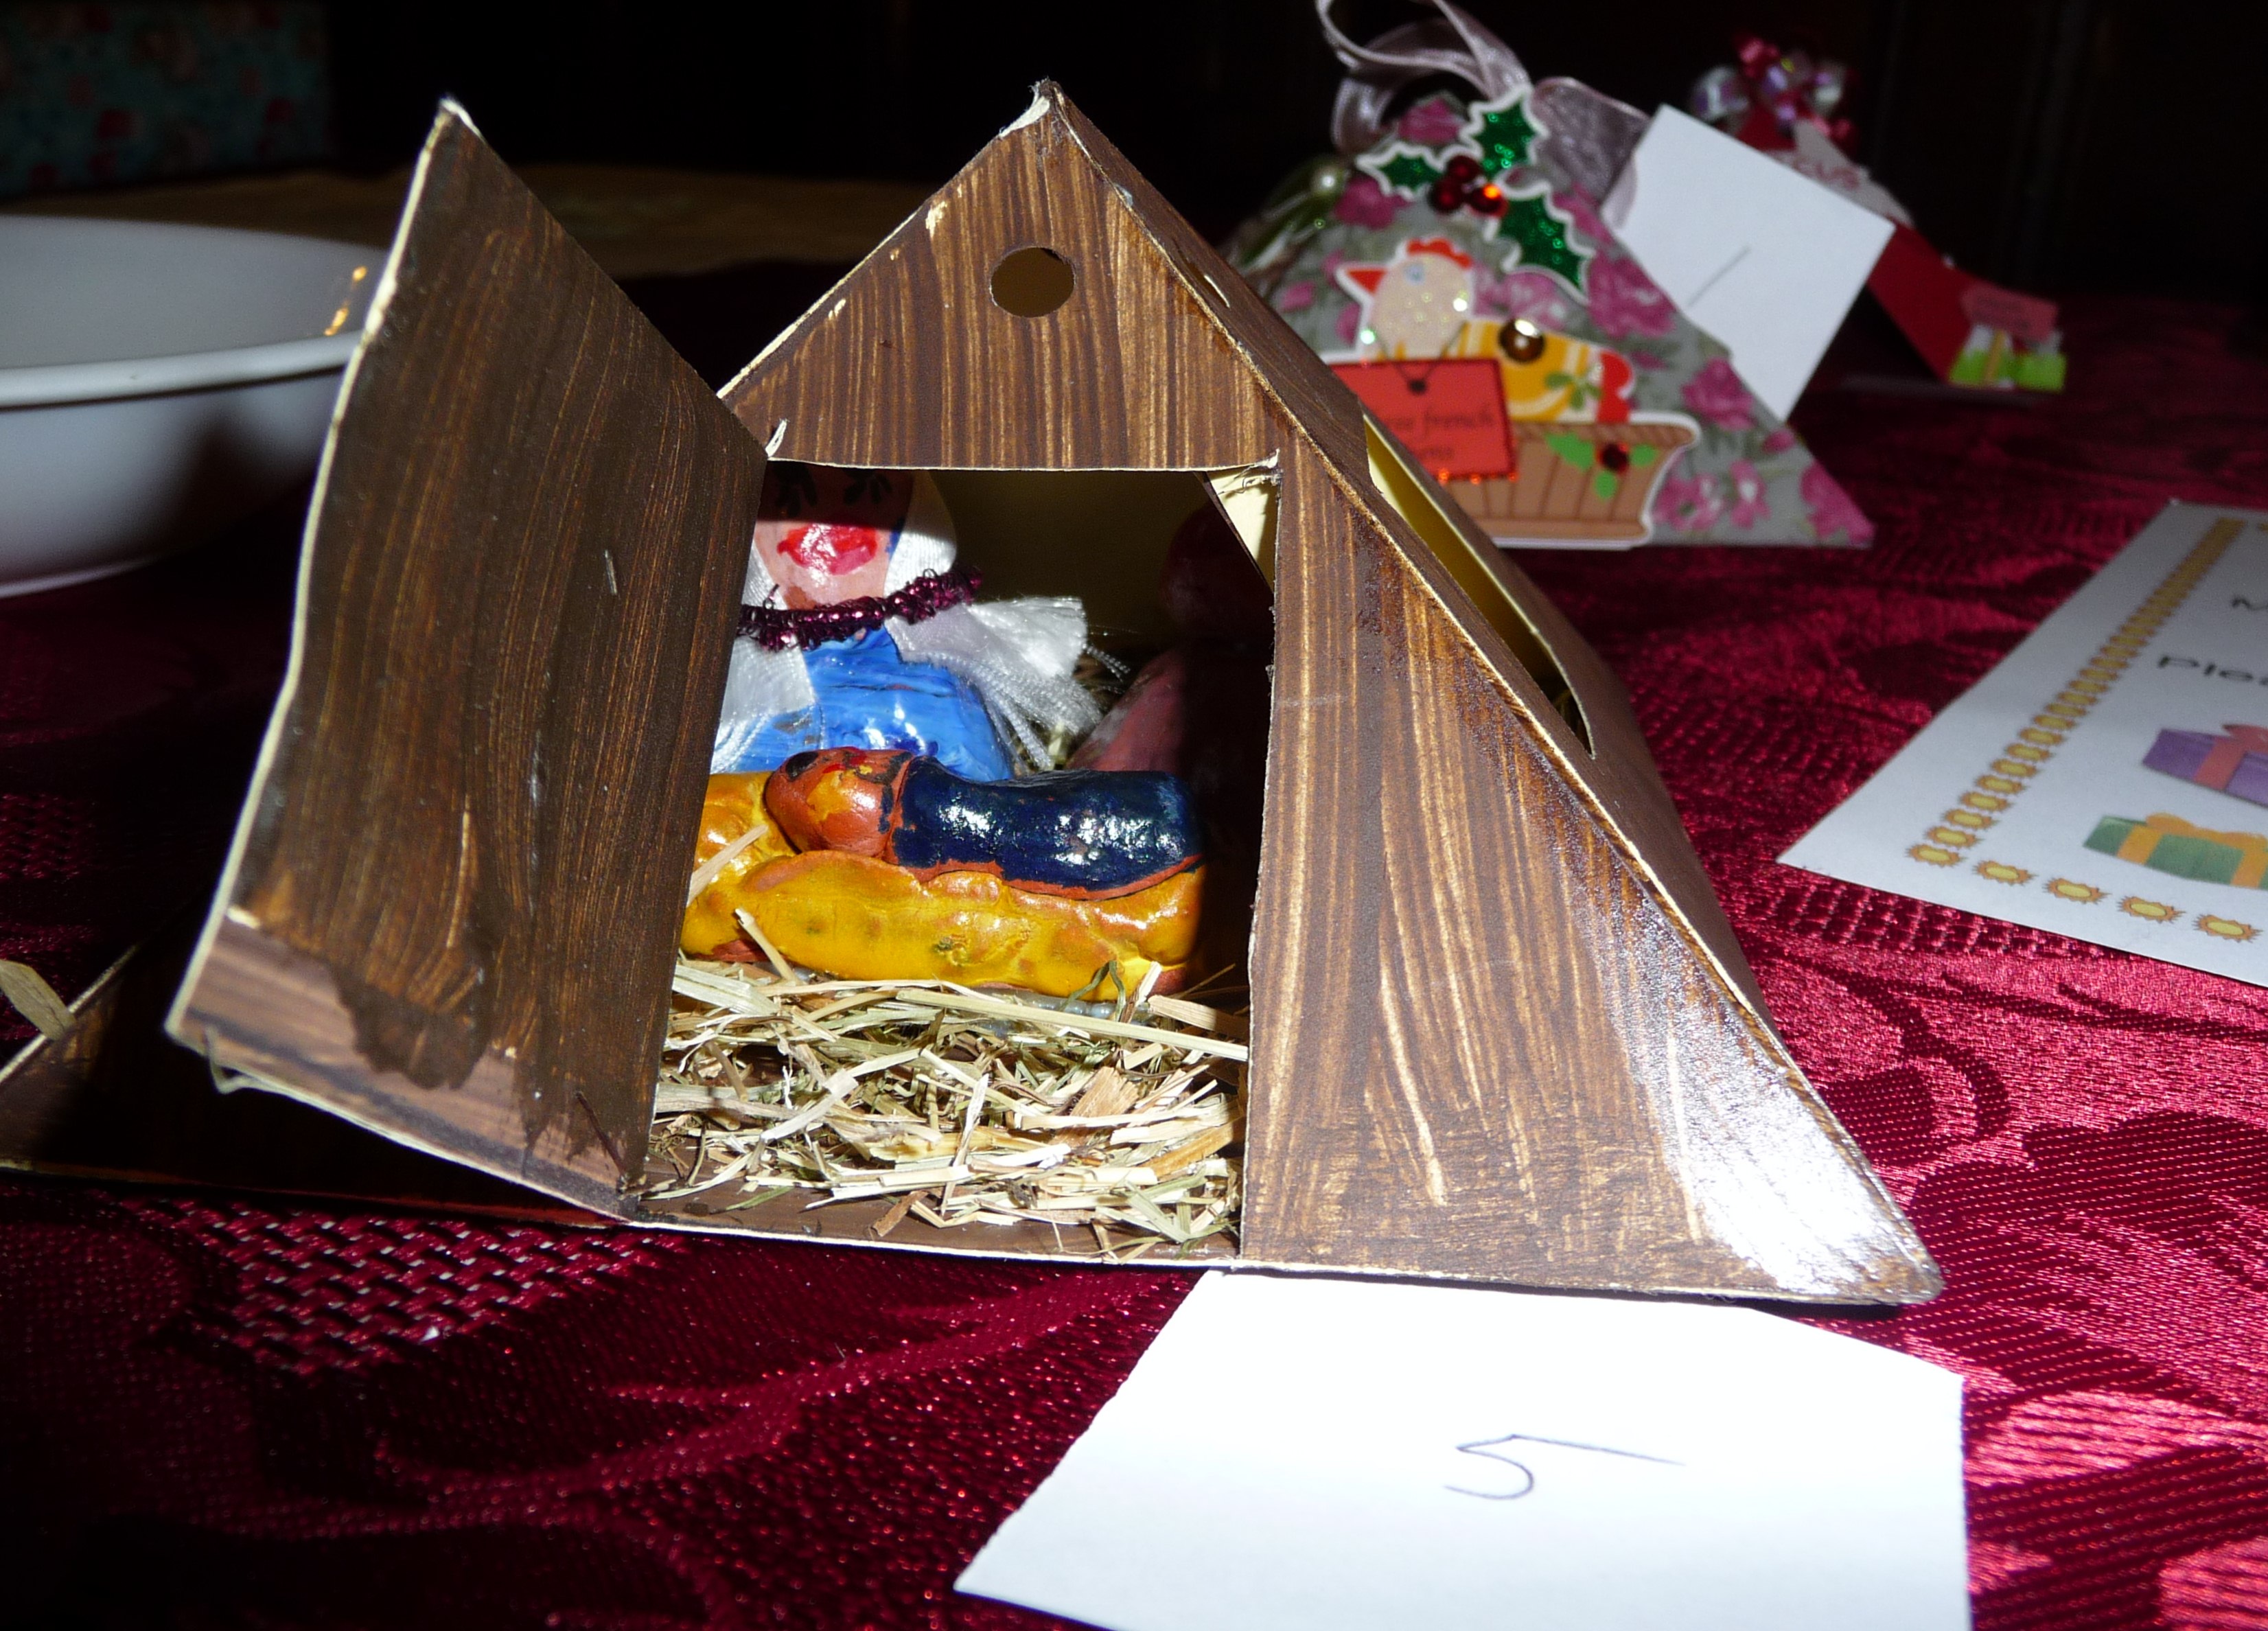 MEG Christmas Party 2015- YE competition. This is Emma Lewis's winning entry of a Nativity scene